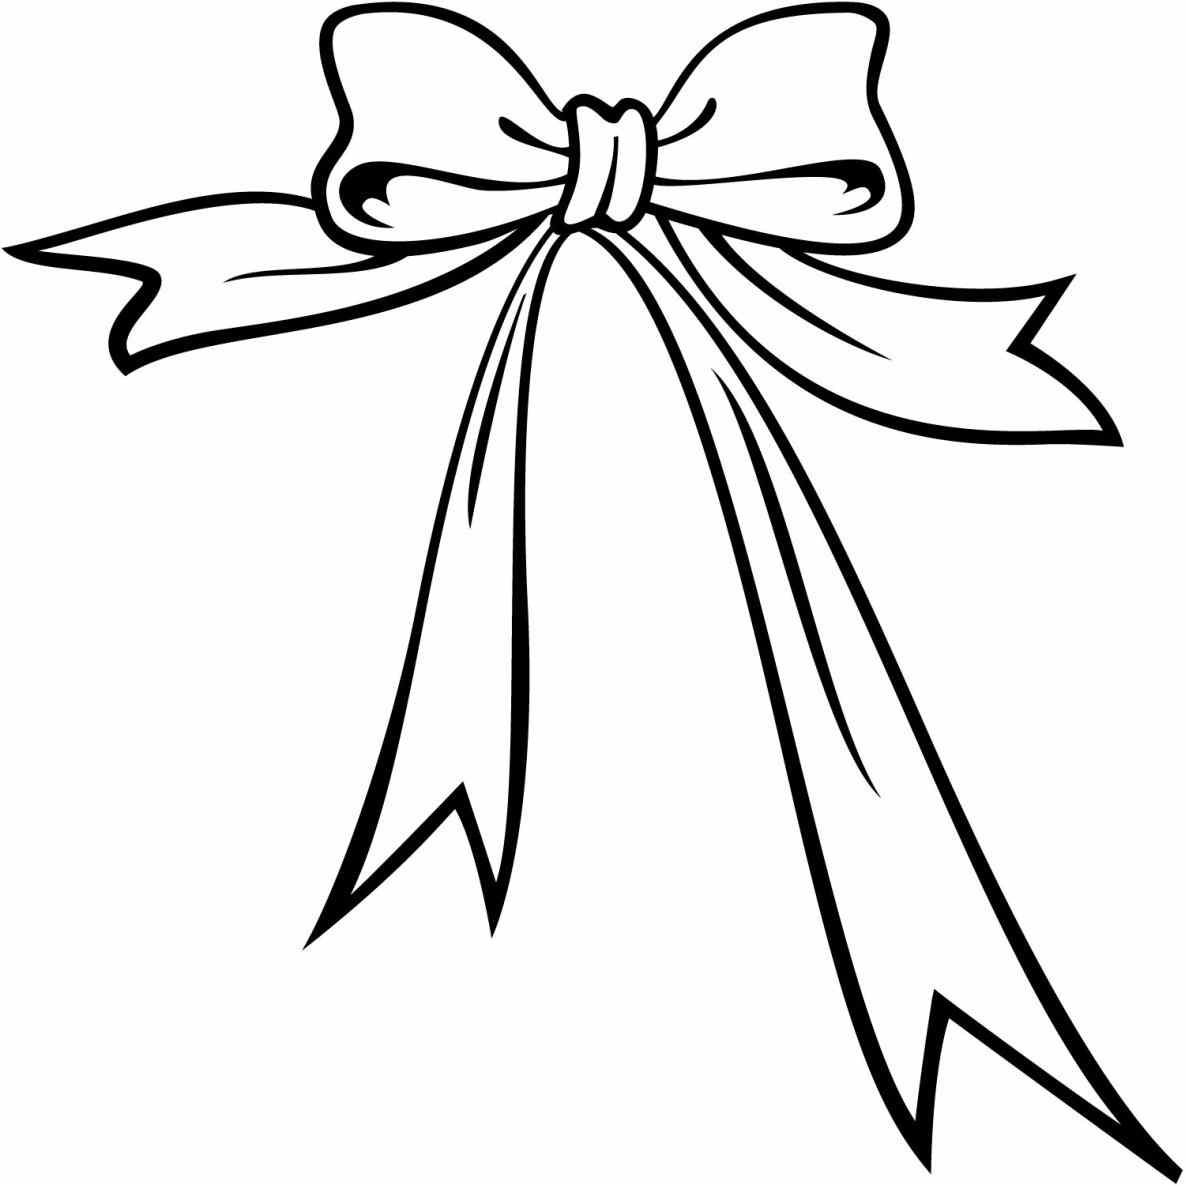 Amazing How To Draw A Cheer Bow of the decade Learn more here 